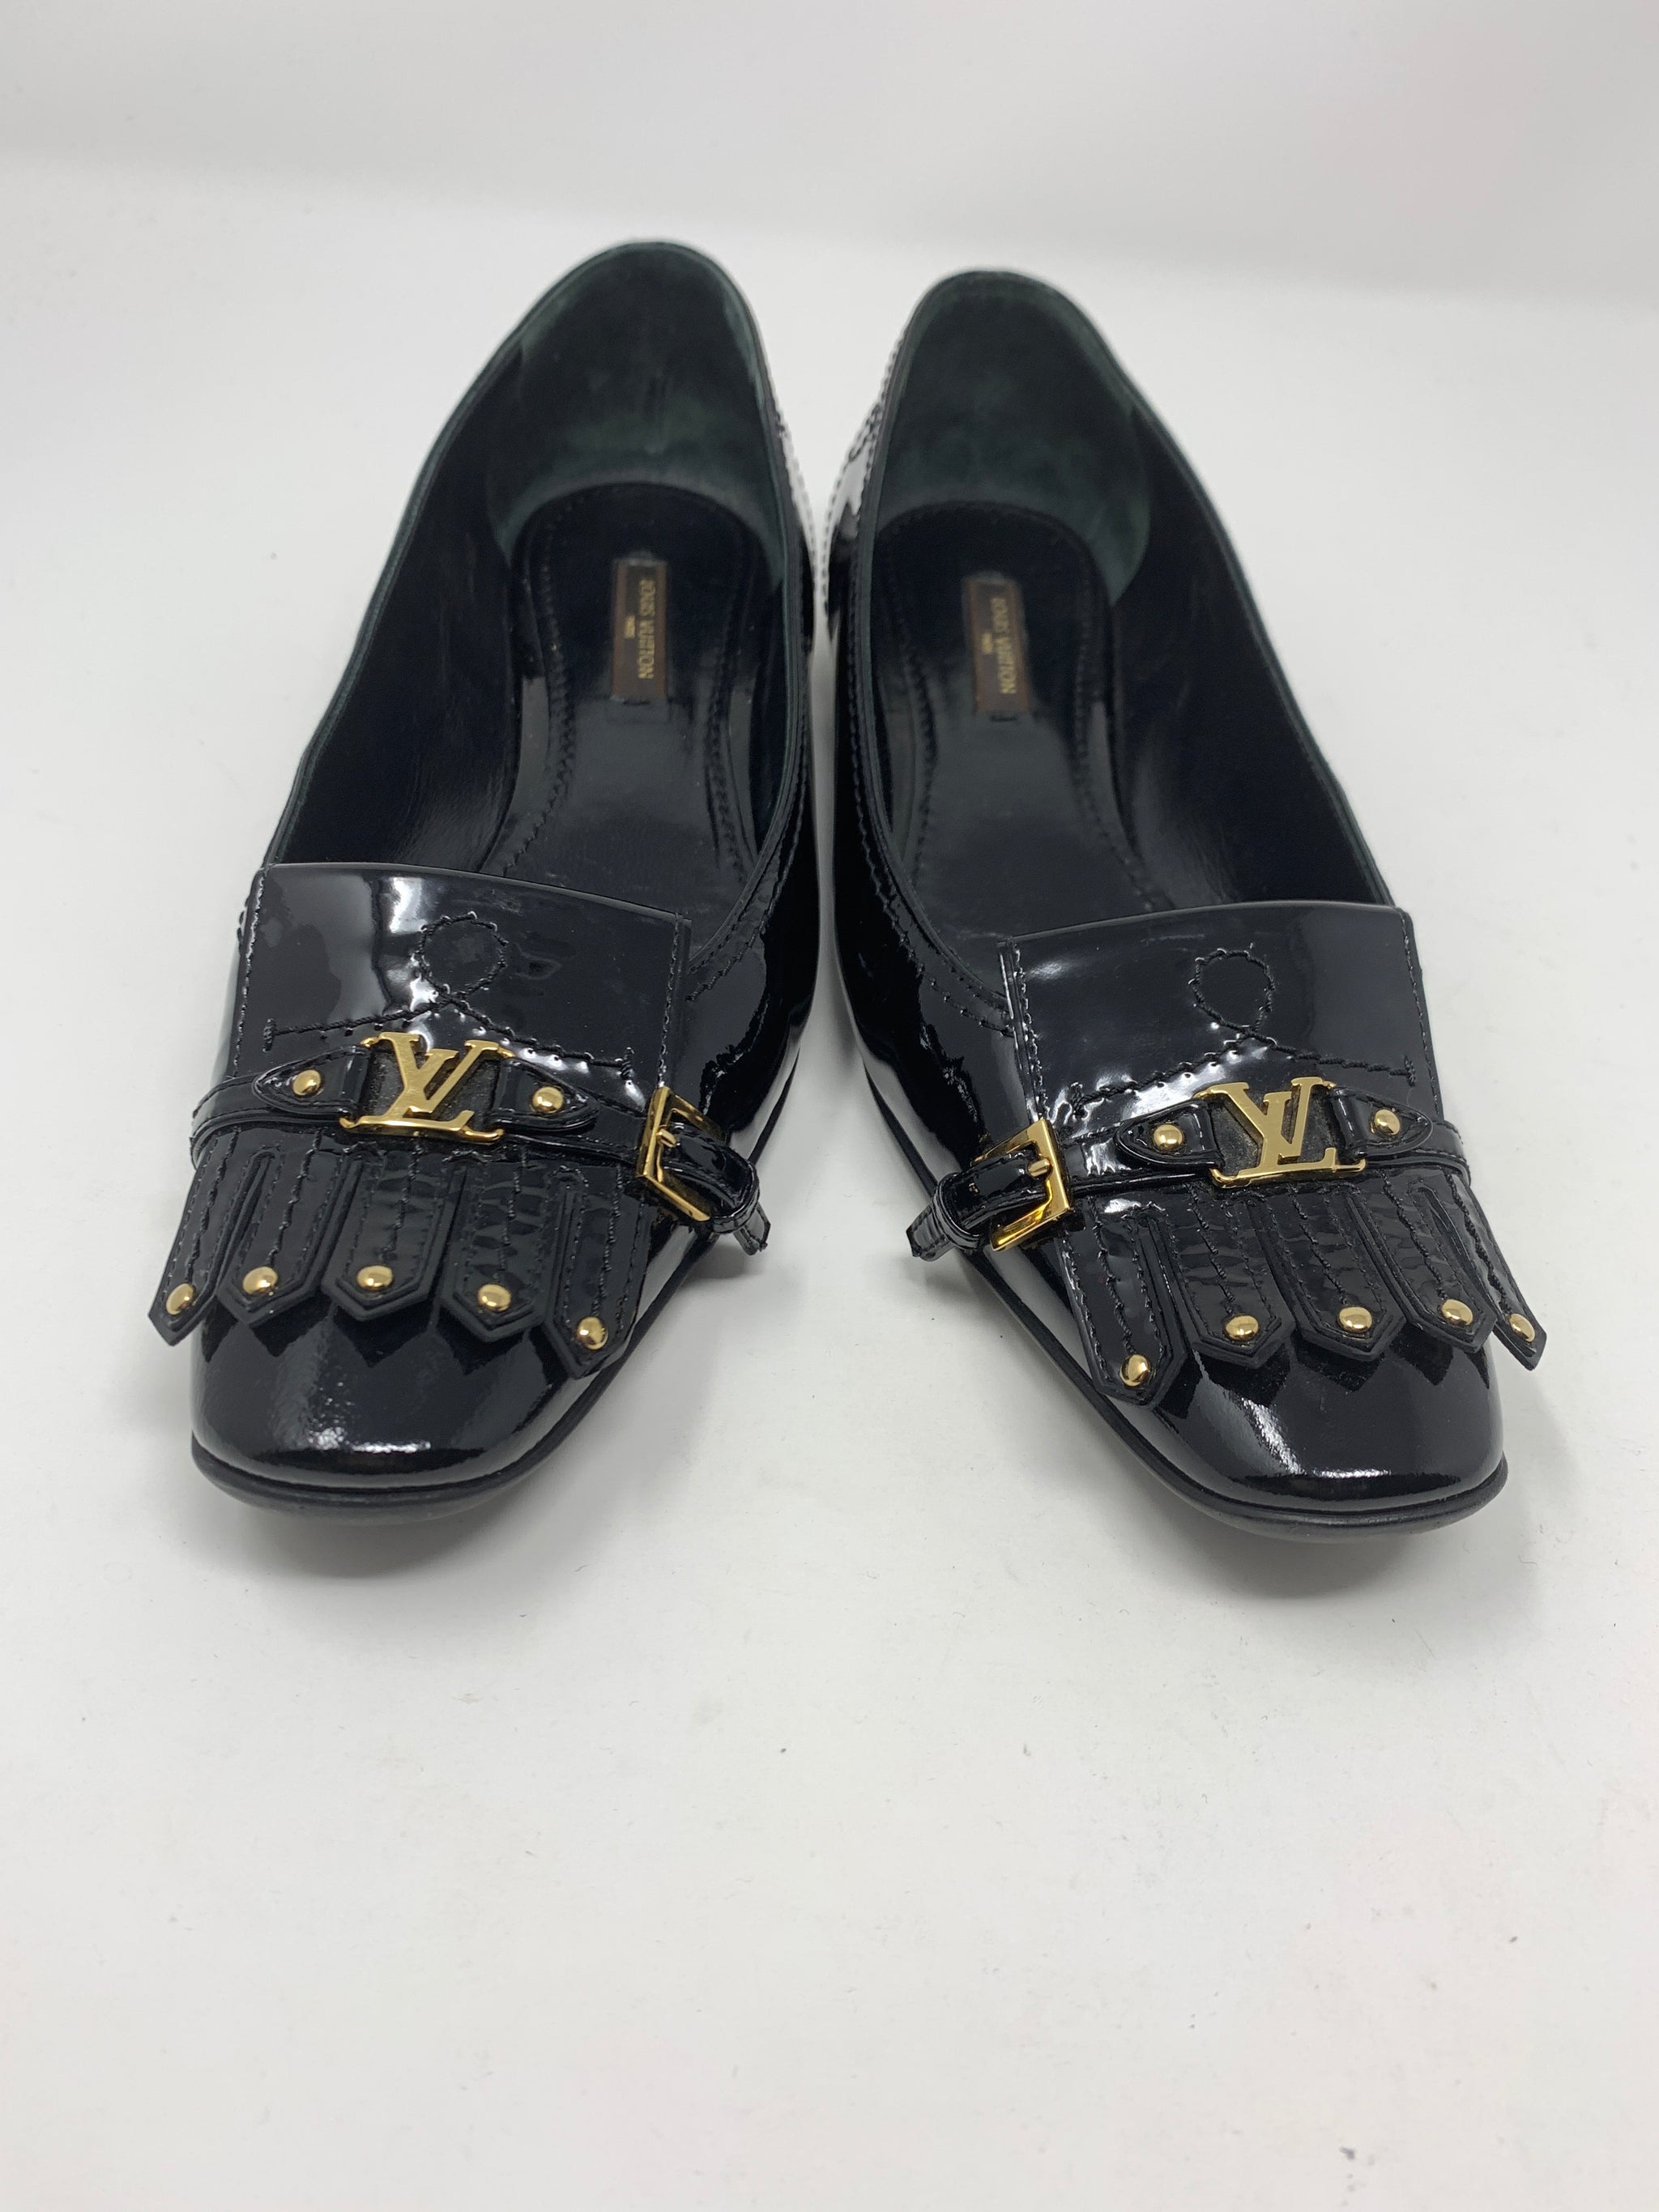 LOUIS VUITTON PATENT LEATHER SHOE WITH BLACK BAND